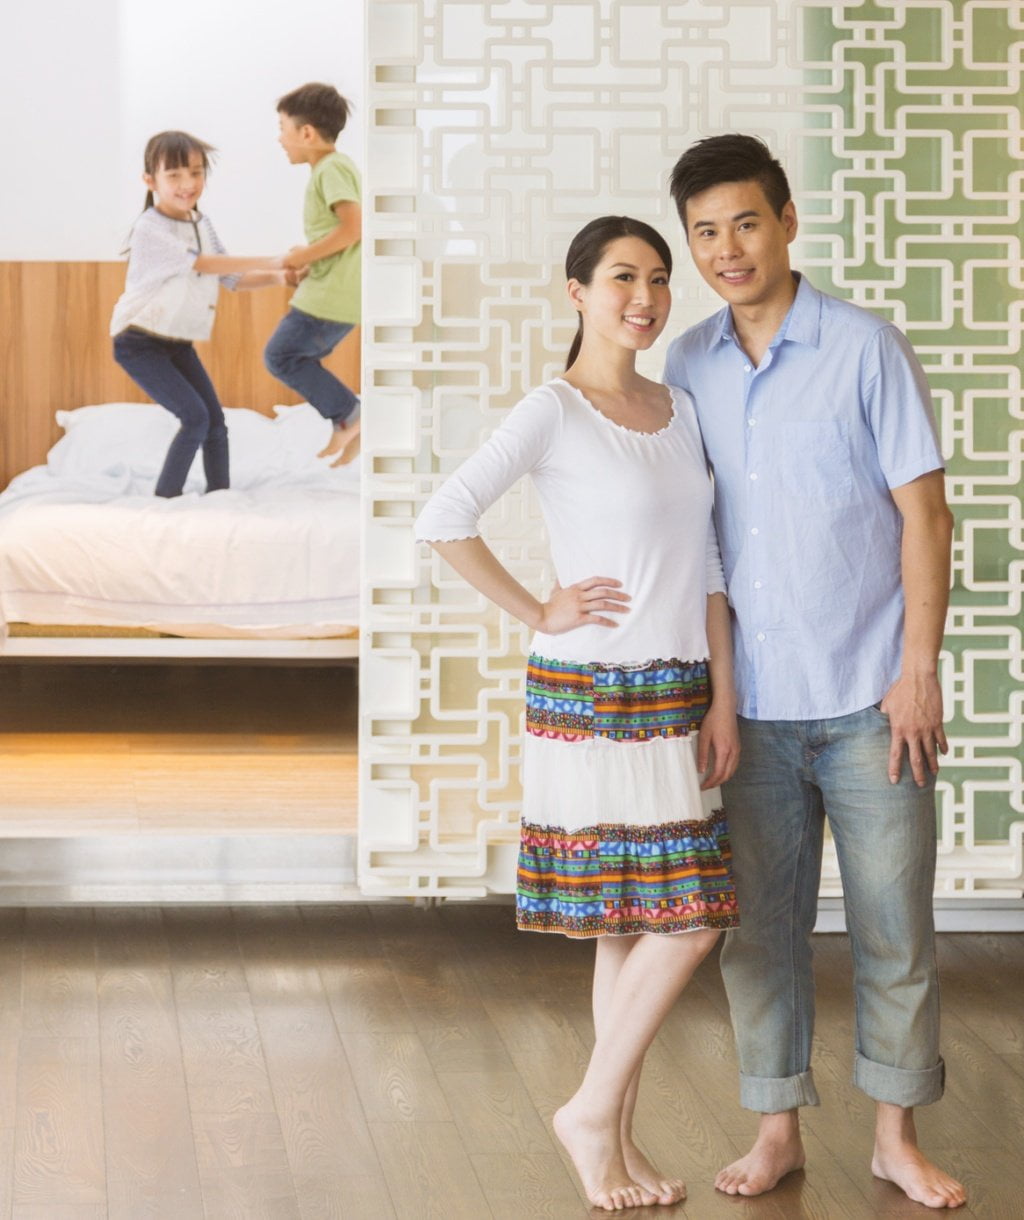 A Chinese family at home. The parents stand together looking at the camera while their two children happily jump on the bed in the background bedroom.